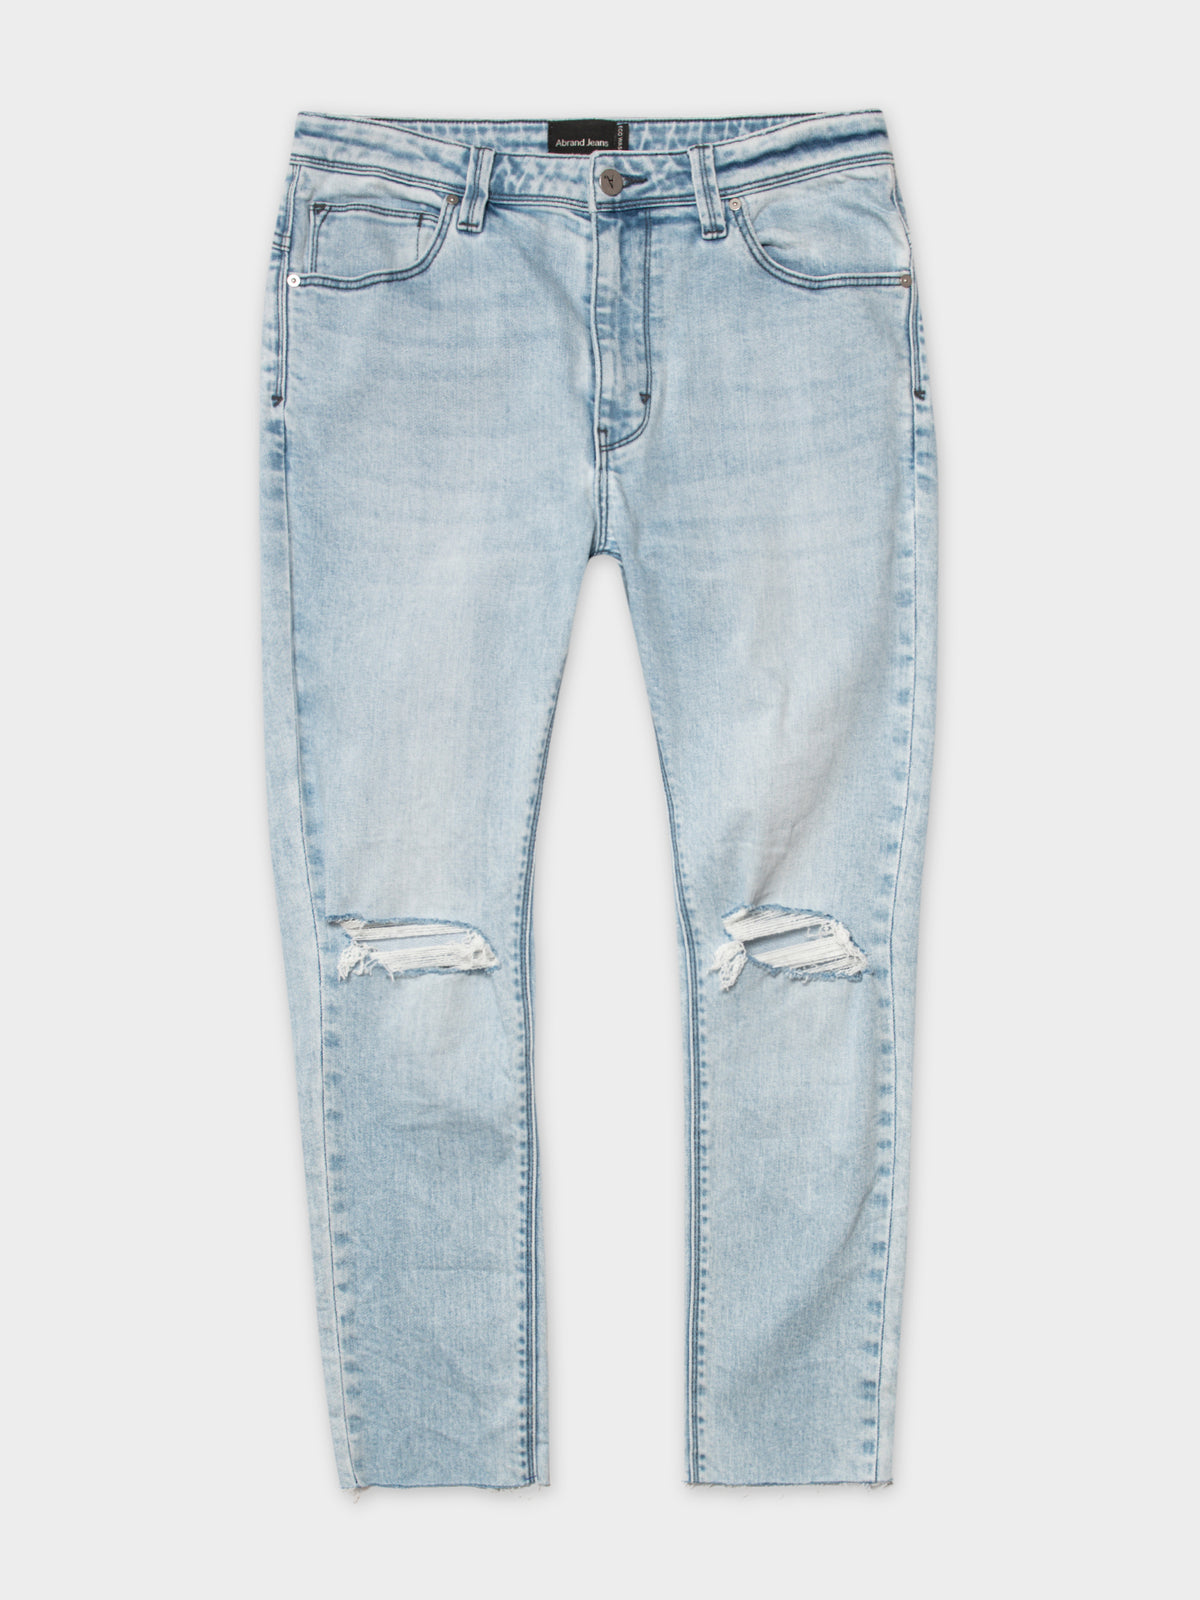 A Dropped Skinny Jeans in Ace Rip Eco